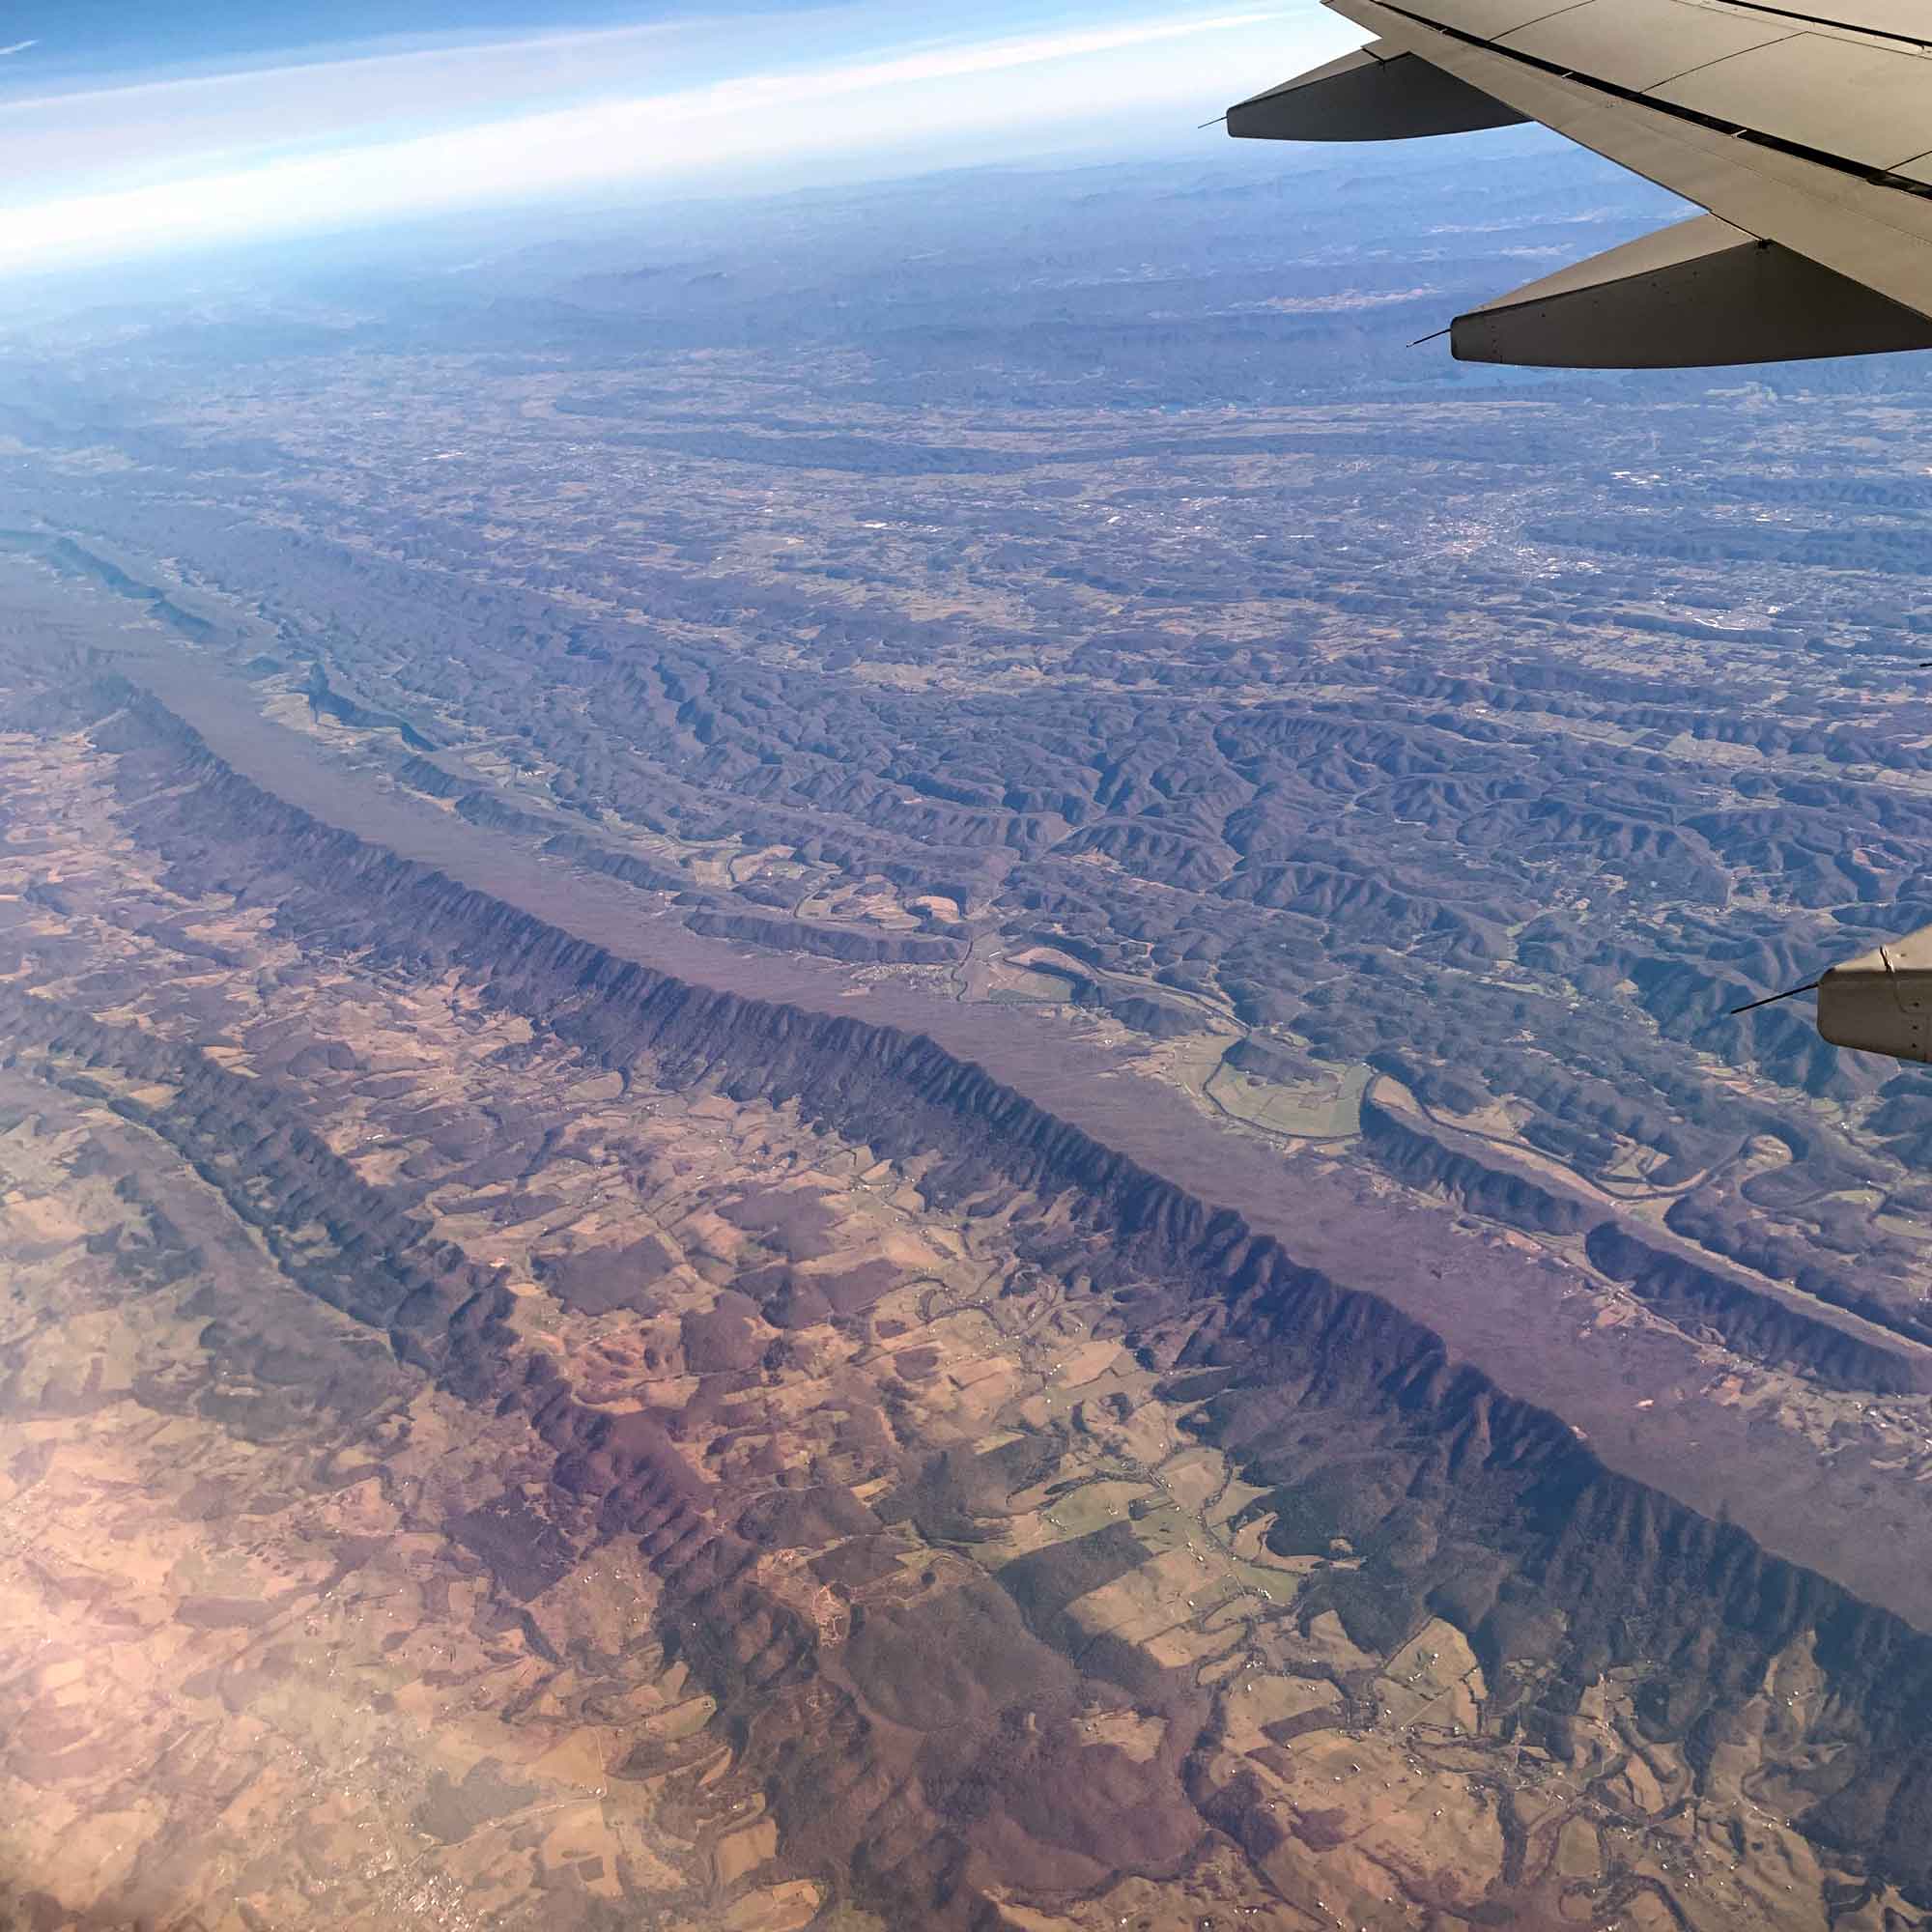 Photograph from an airplane showing the Valley and Ridge region of Pennsylvania.